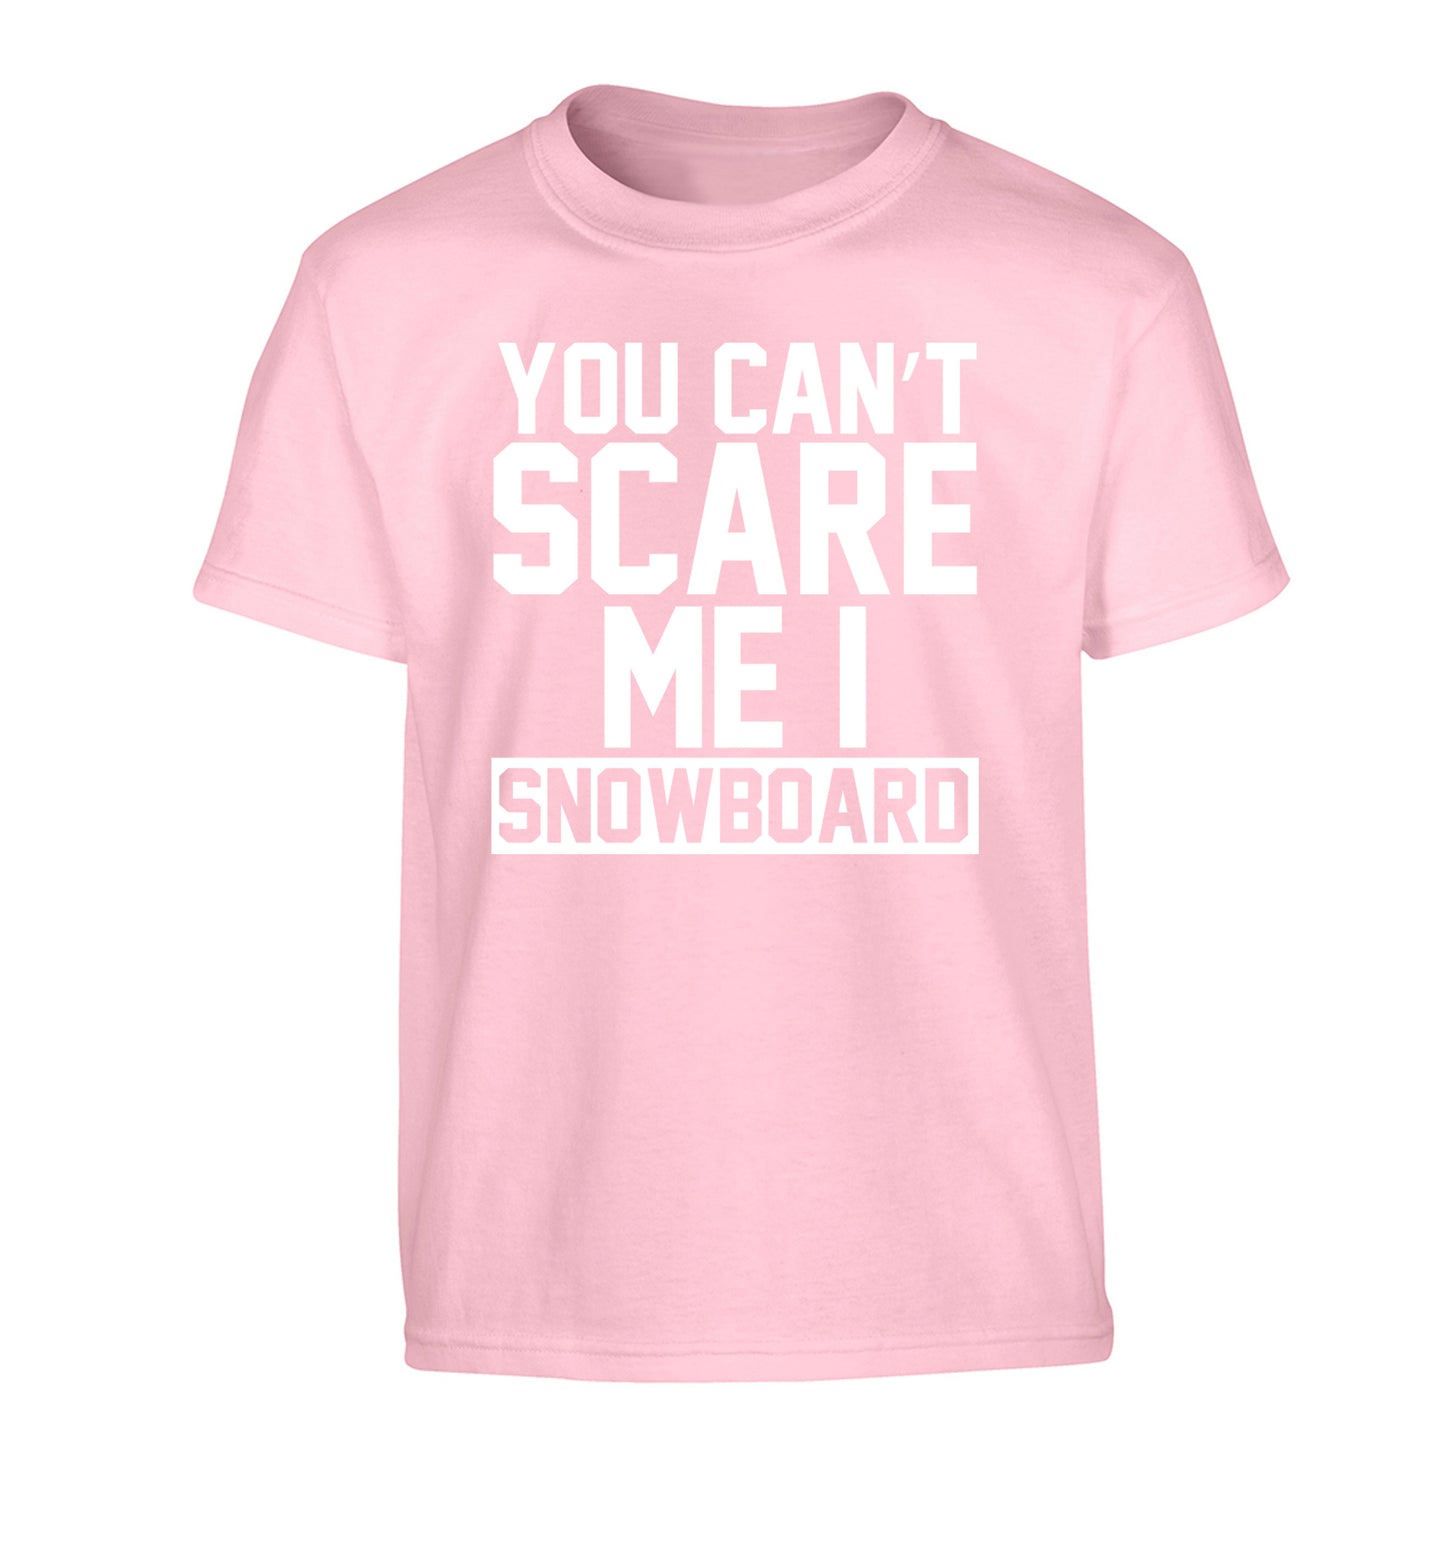 You can't scare me I snowboard Children's light pink Tshirt 12-14 Years